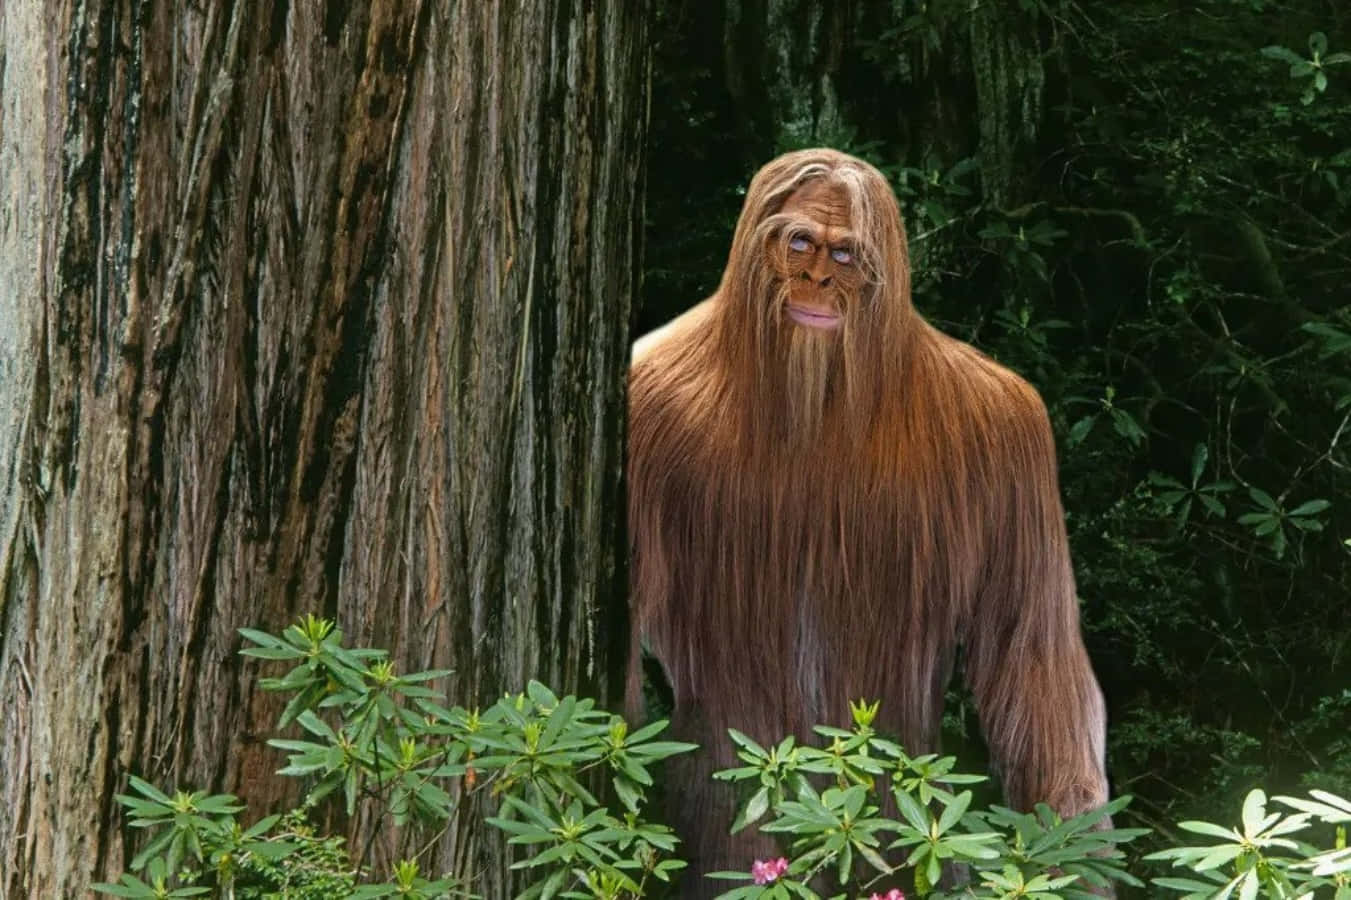 A mysterious figure of Bigfoot spotted in the woods.